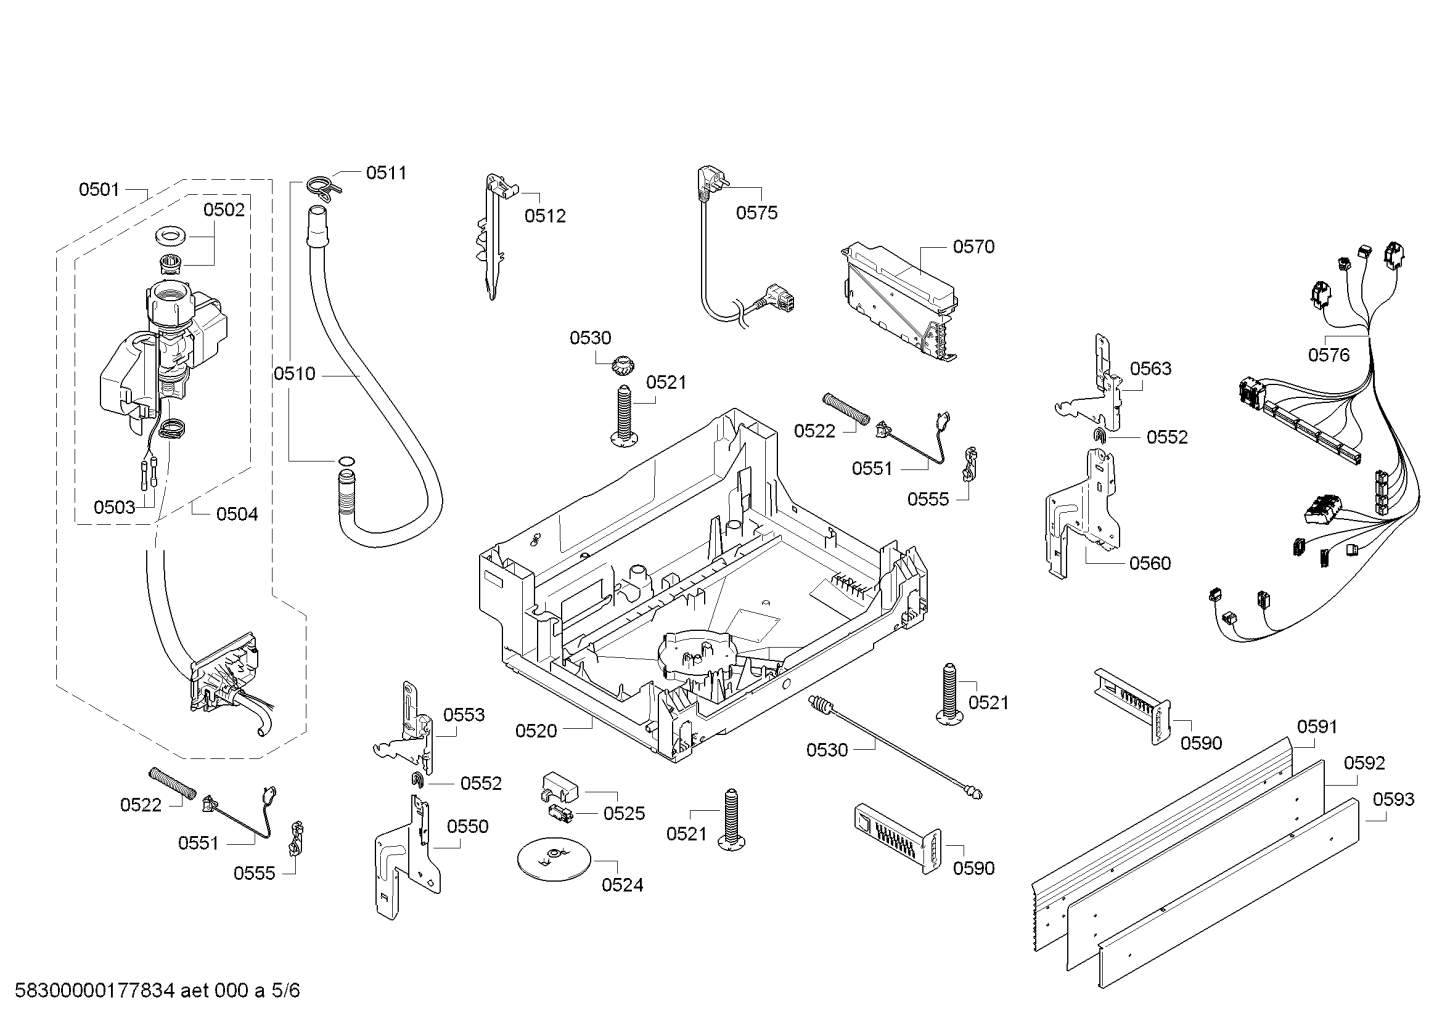 drawing_link_5_device_1624263